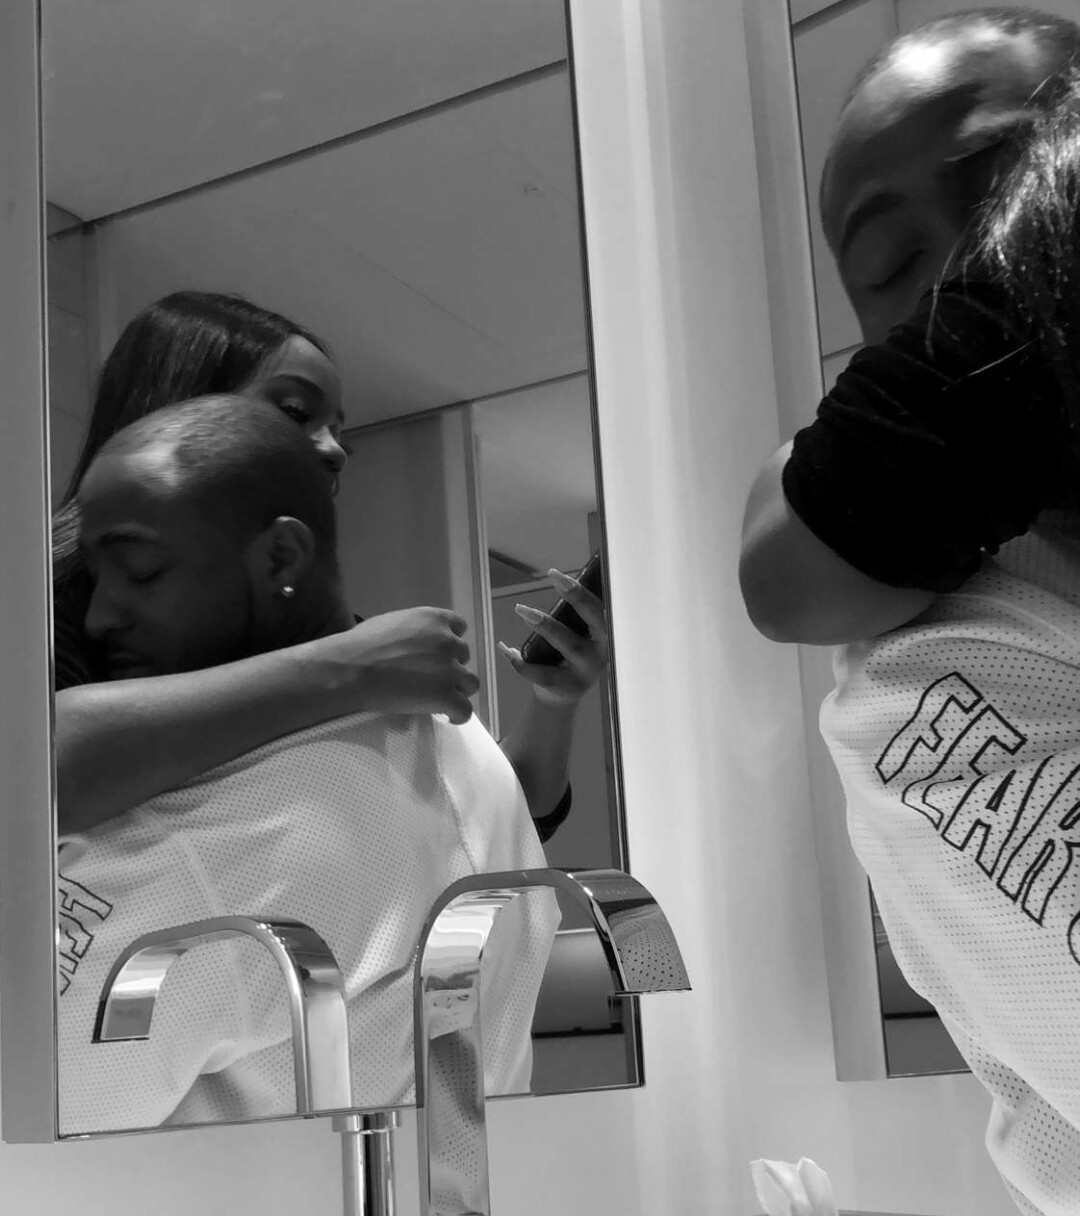 New loved up photos of Davido and his girlfriend, Chioma after his concert in London